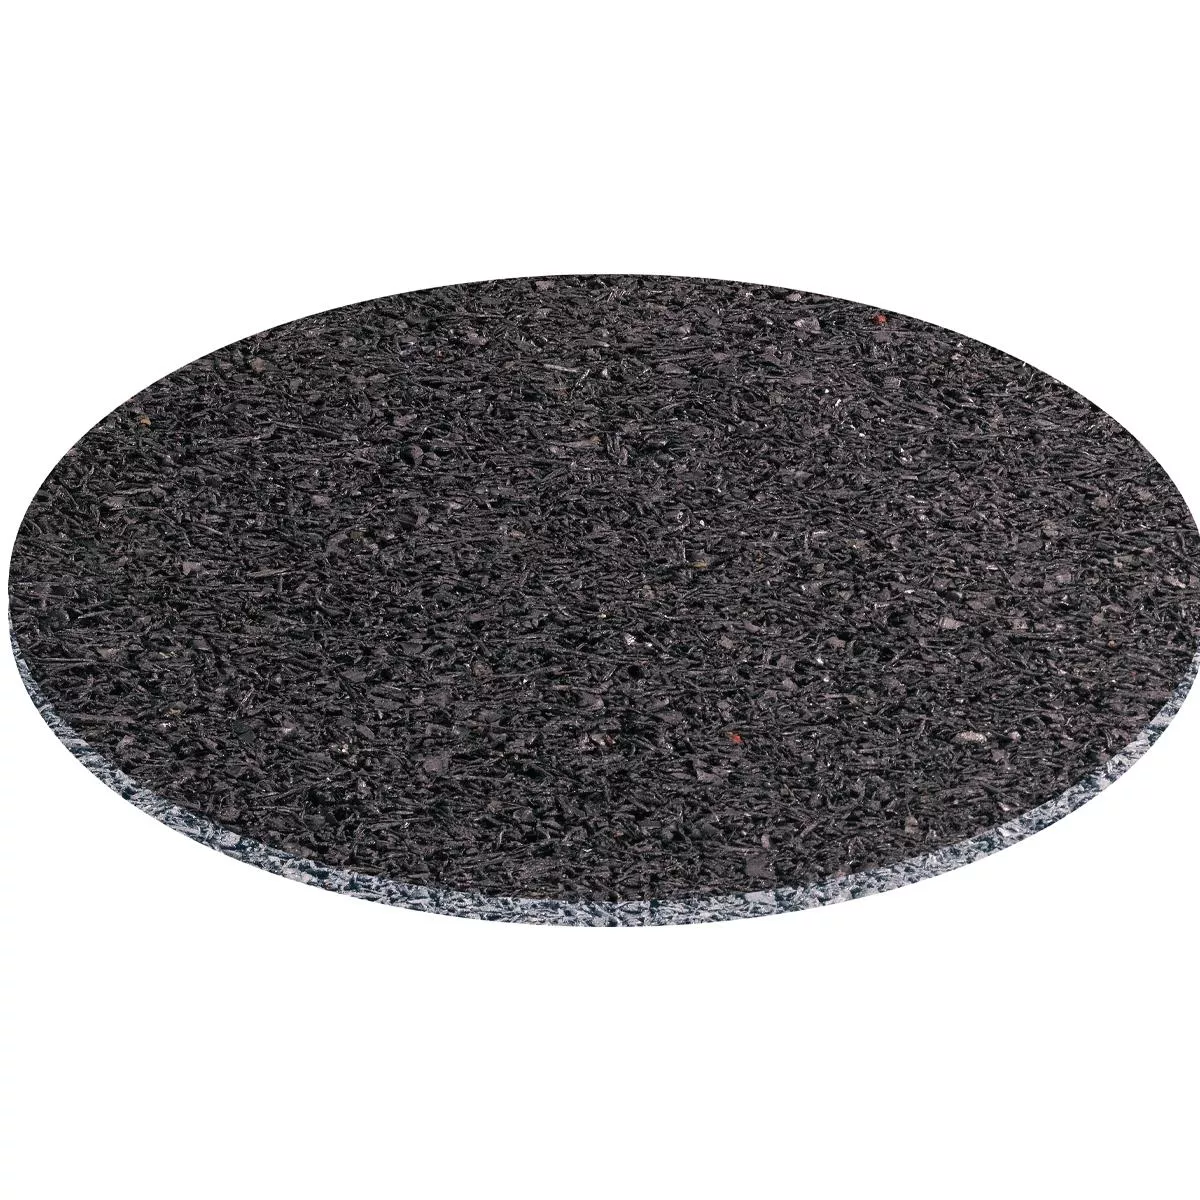 Soundproofing washer self-adhesive